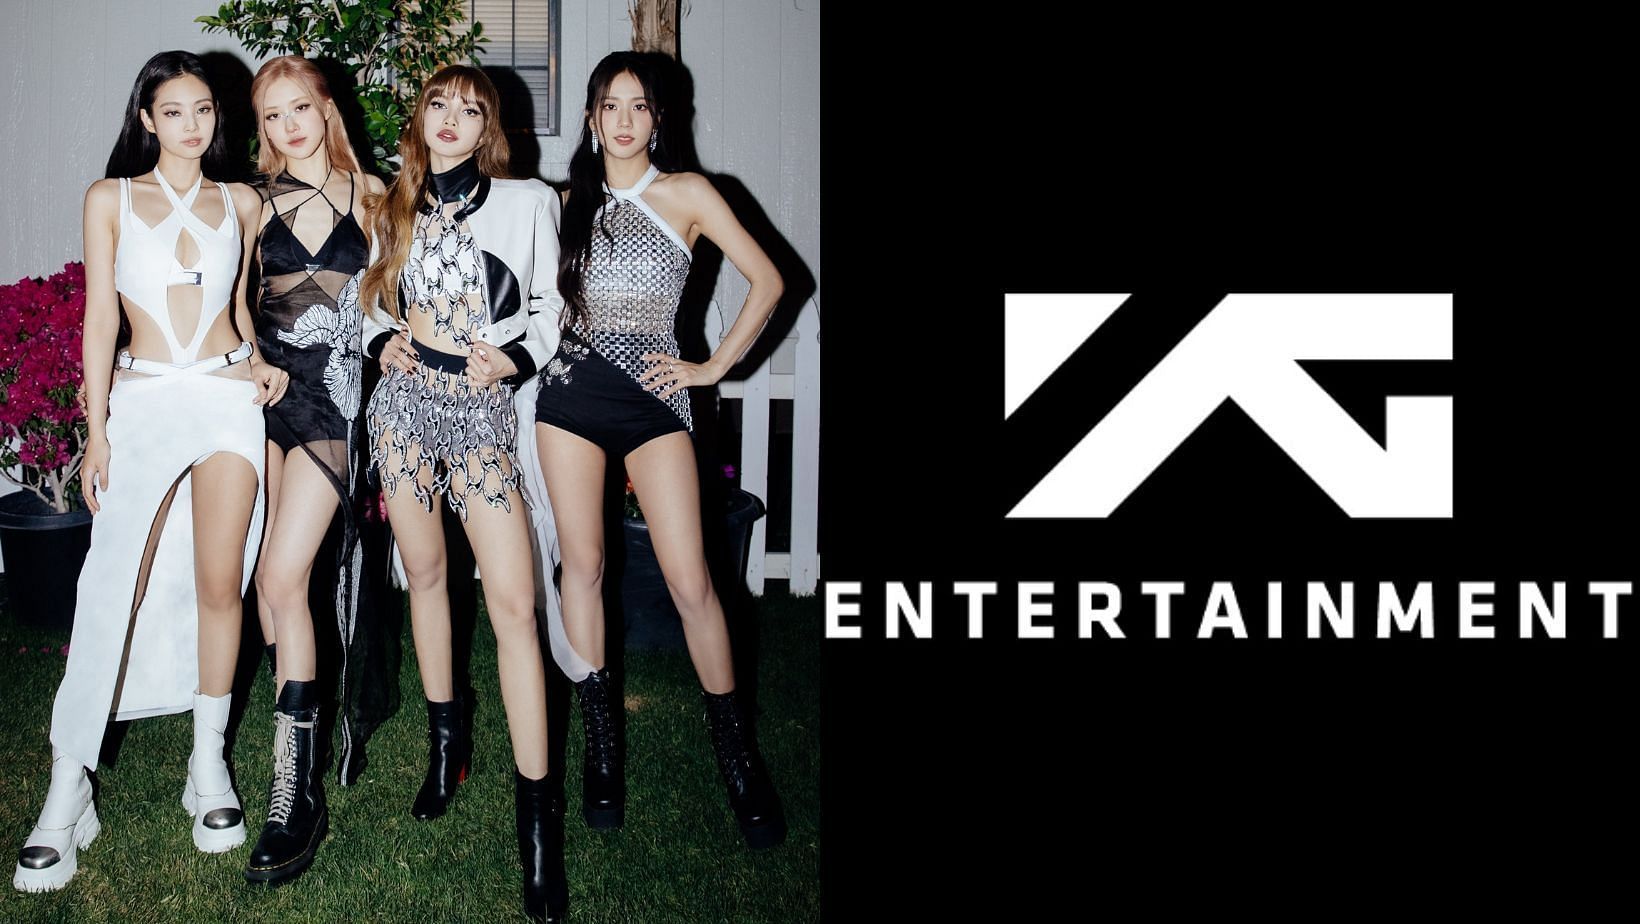 YG Entertainment&rsquo;s stock price continues to decline after falling to secure solo contracts of the BLACKPINK. (Images via X/@BLACKPINK, @AboutMusicYT)